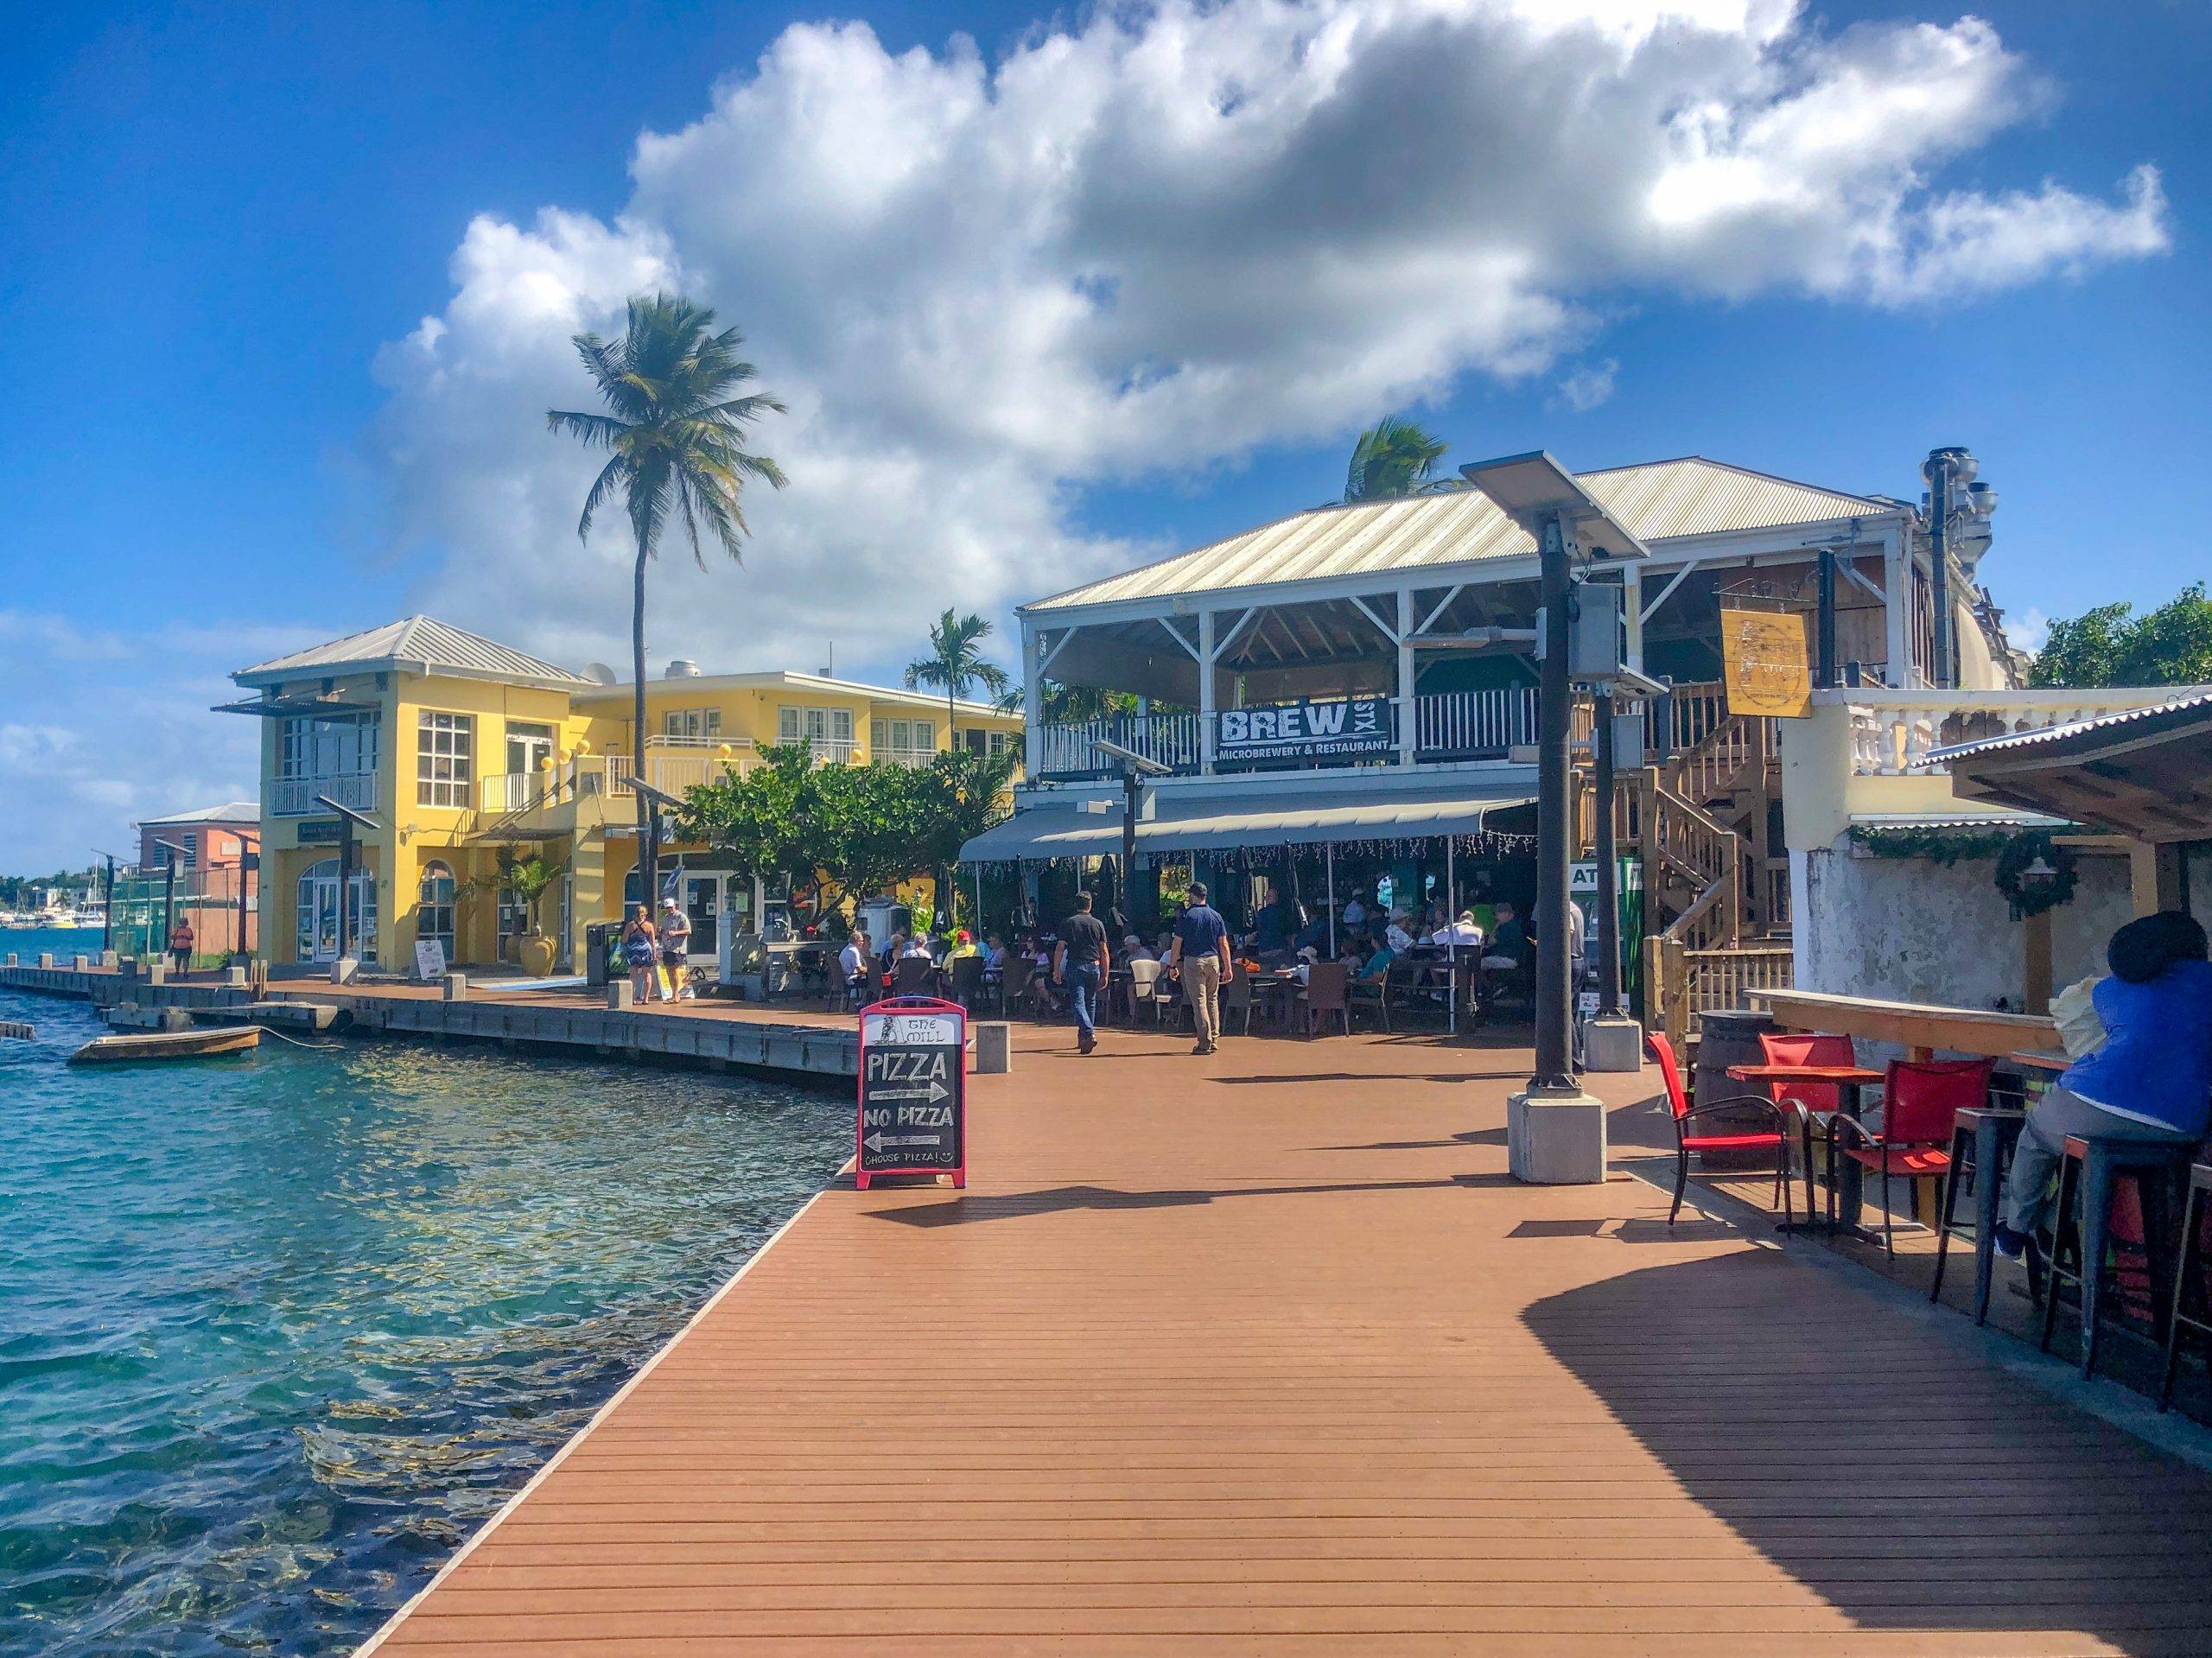 St Croix Travel Guide. Restaurants, Things to Do, Places to Stay.